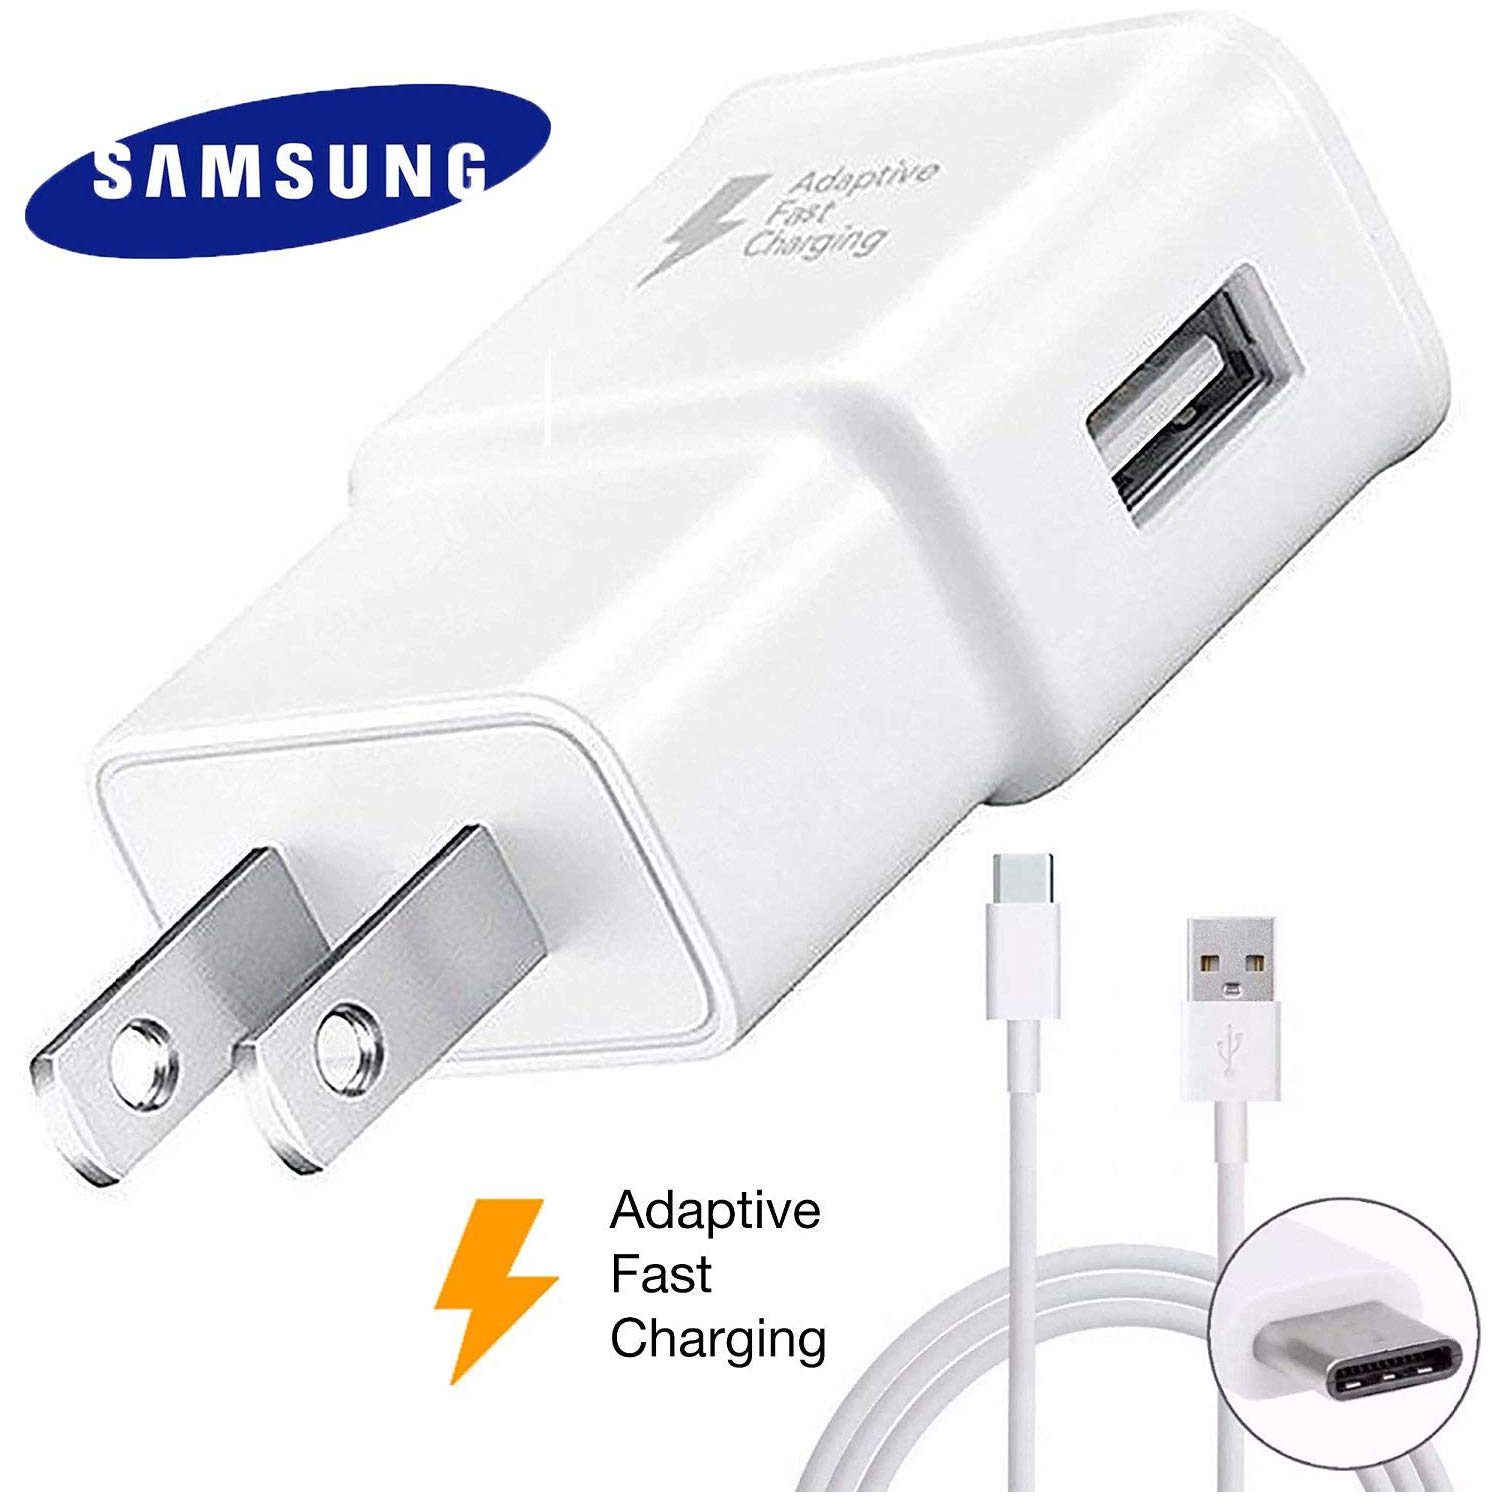 Samsung Fast Charger EP-TA20JWE and USB Type C Cable EP-DG950CWE for Galaxy S9 / S9+ / Note 9 / Note 8 / S8 / S8+/ A8 - WHITE